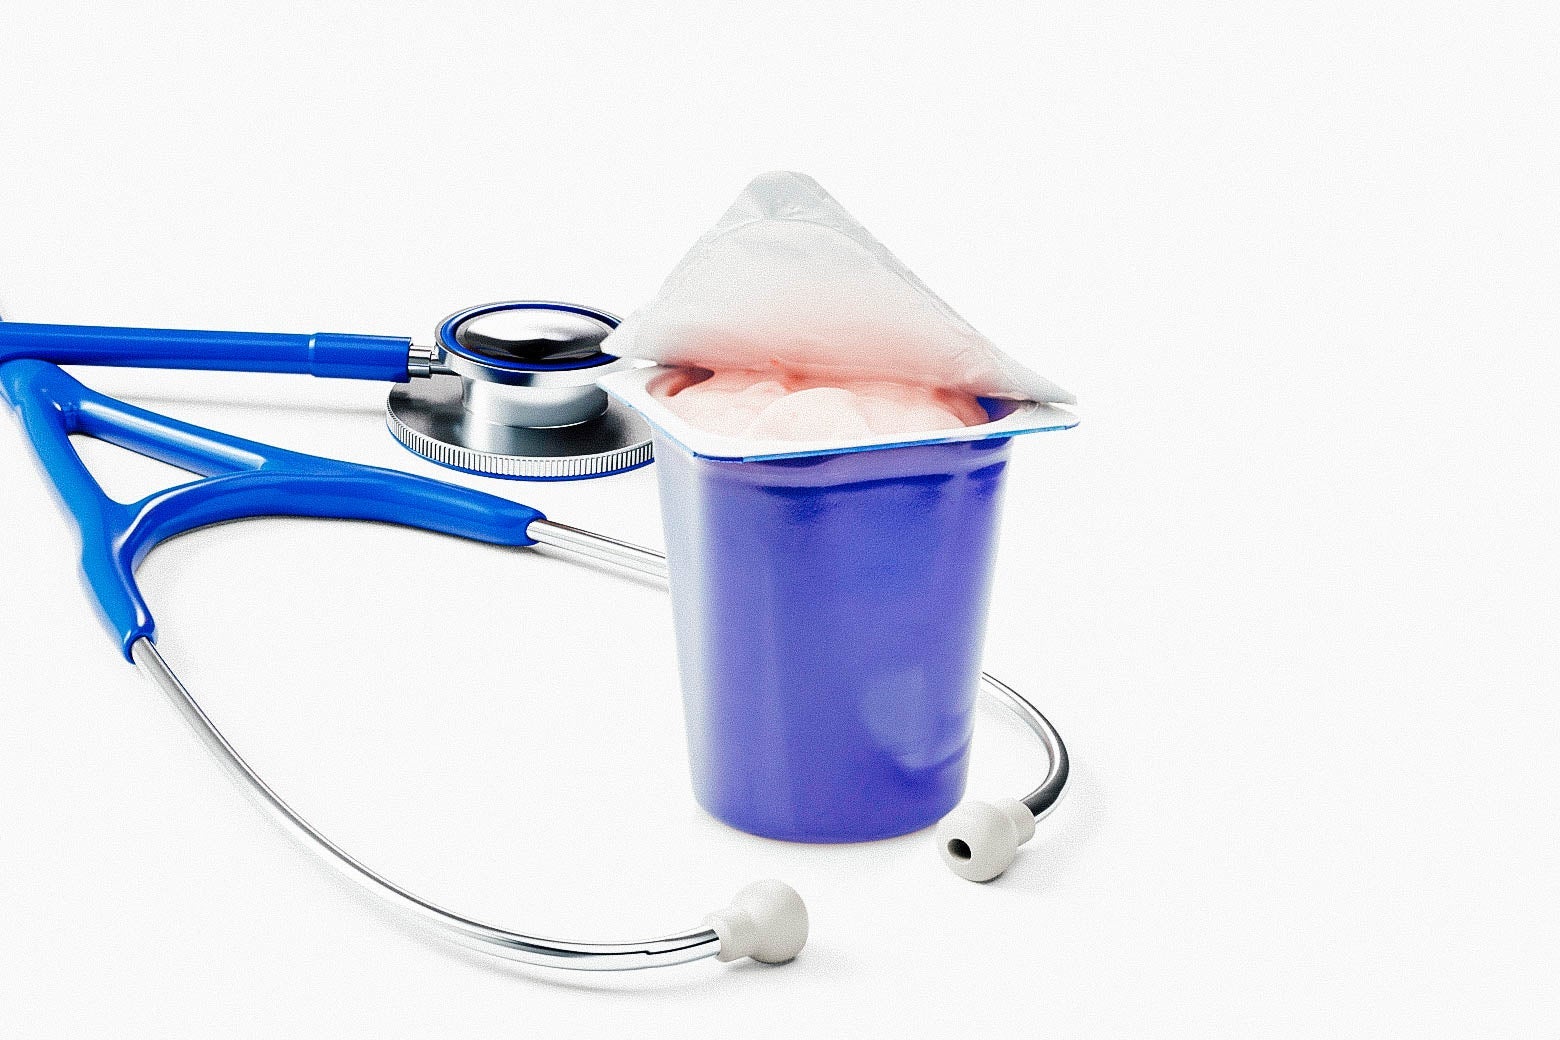 A stethoscope around an open single-serve container of yogurt.